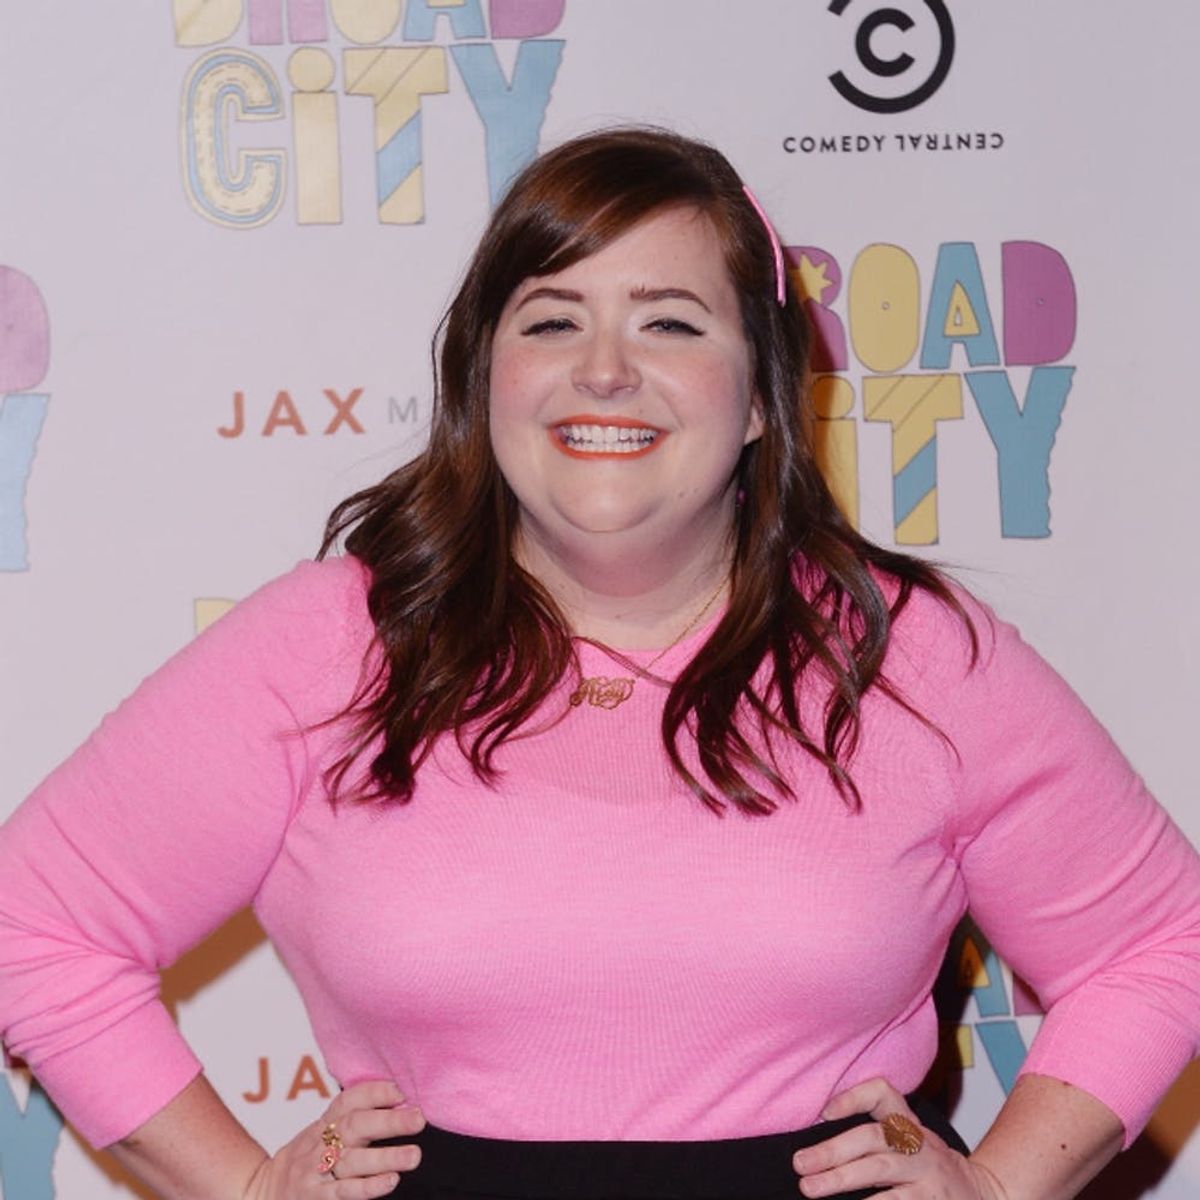 Here’s Why Aidy Bryant Thought Her Fiancé’s Proposal Was a Joke